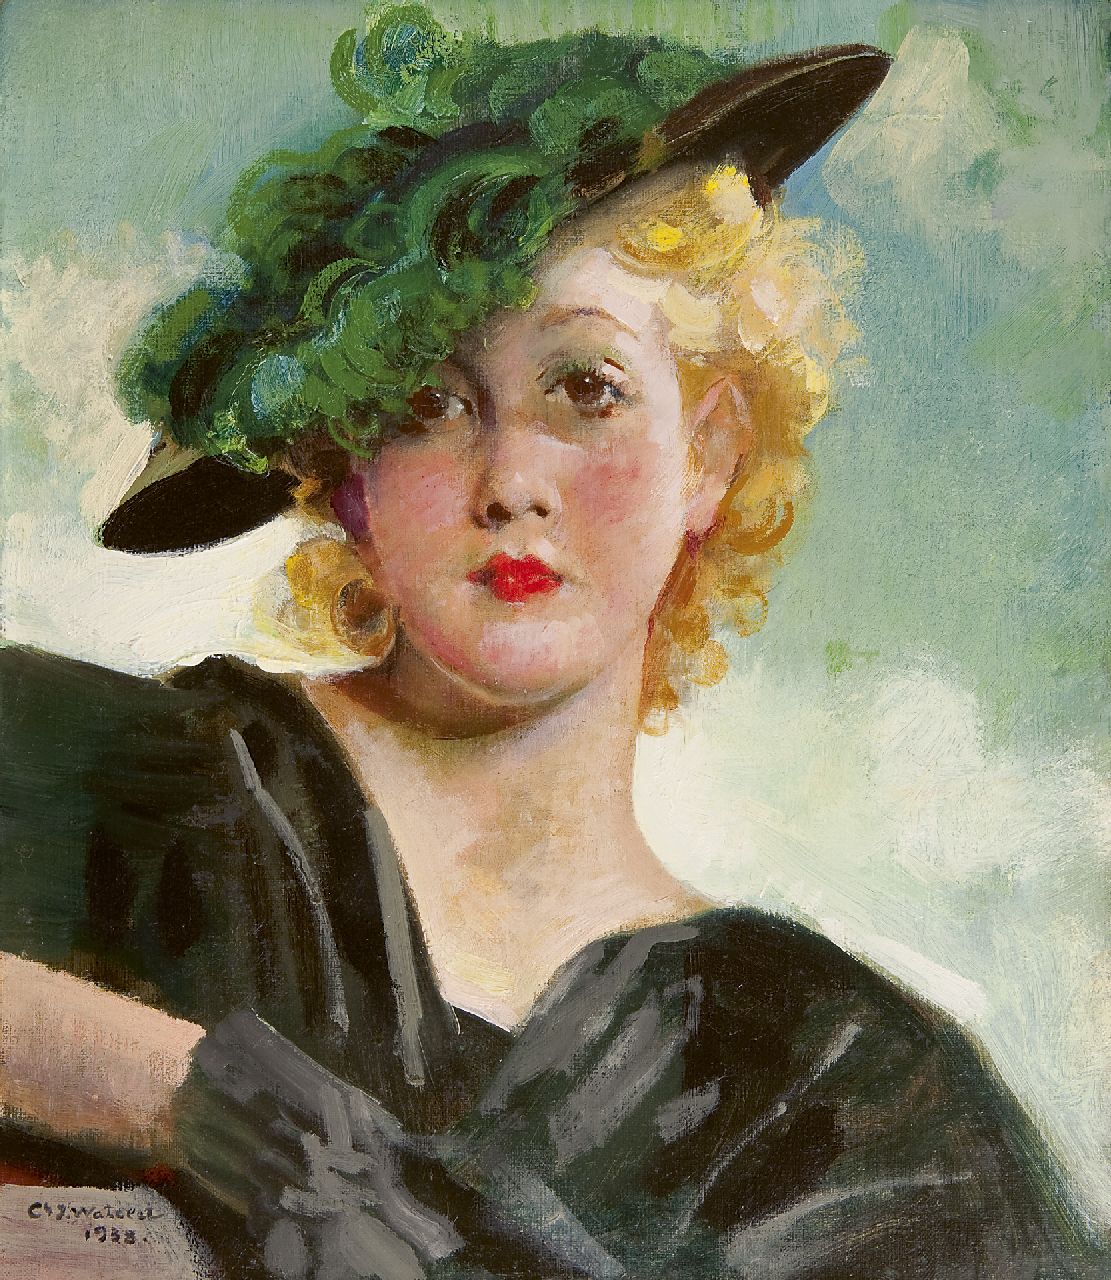 Charles Watelet | Lady with green hat, Öl auf Leinwand, 40,1 x 34,9 cm, signed l.l. und dated 1938